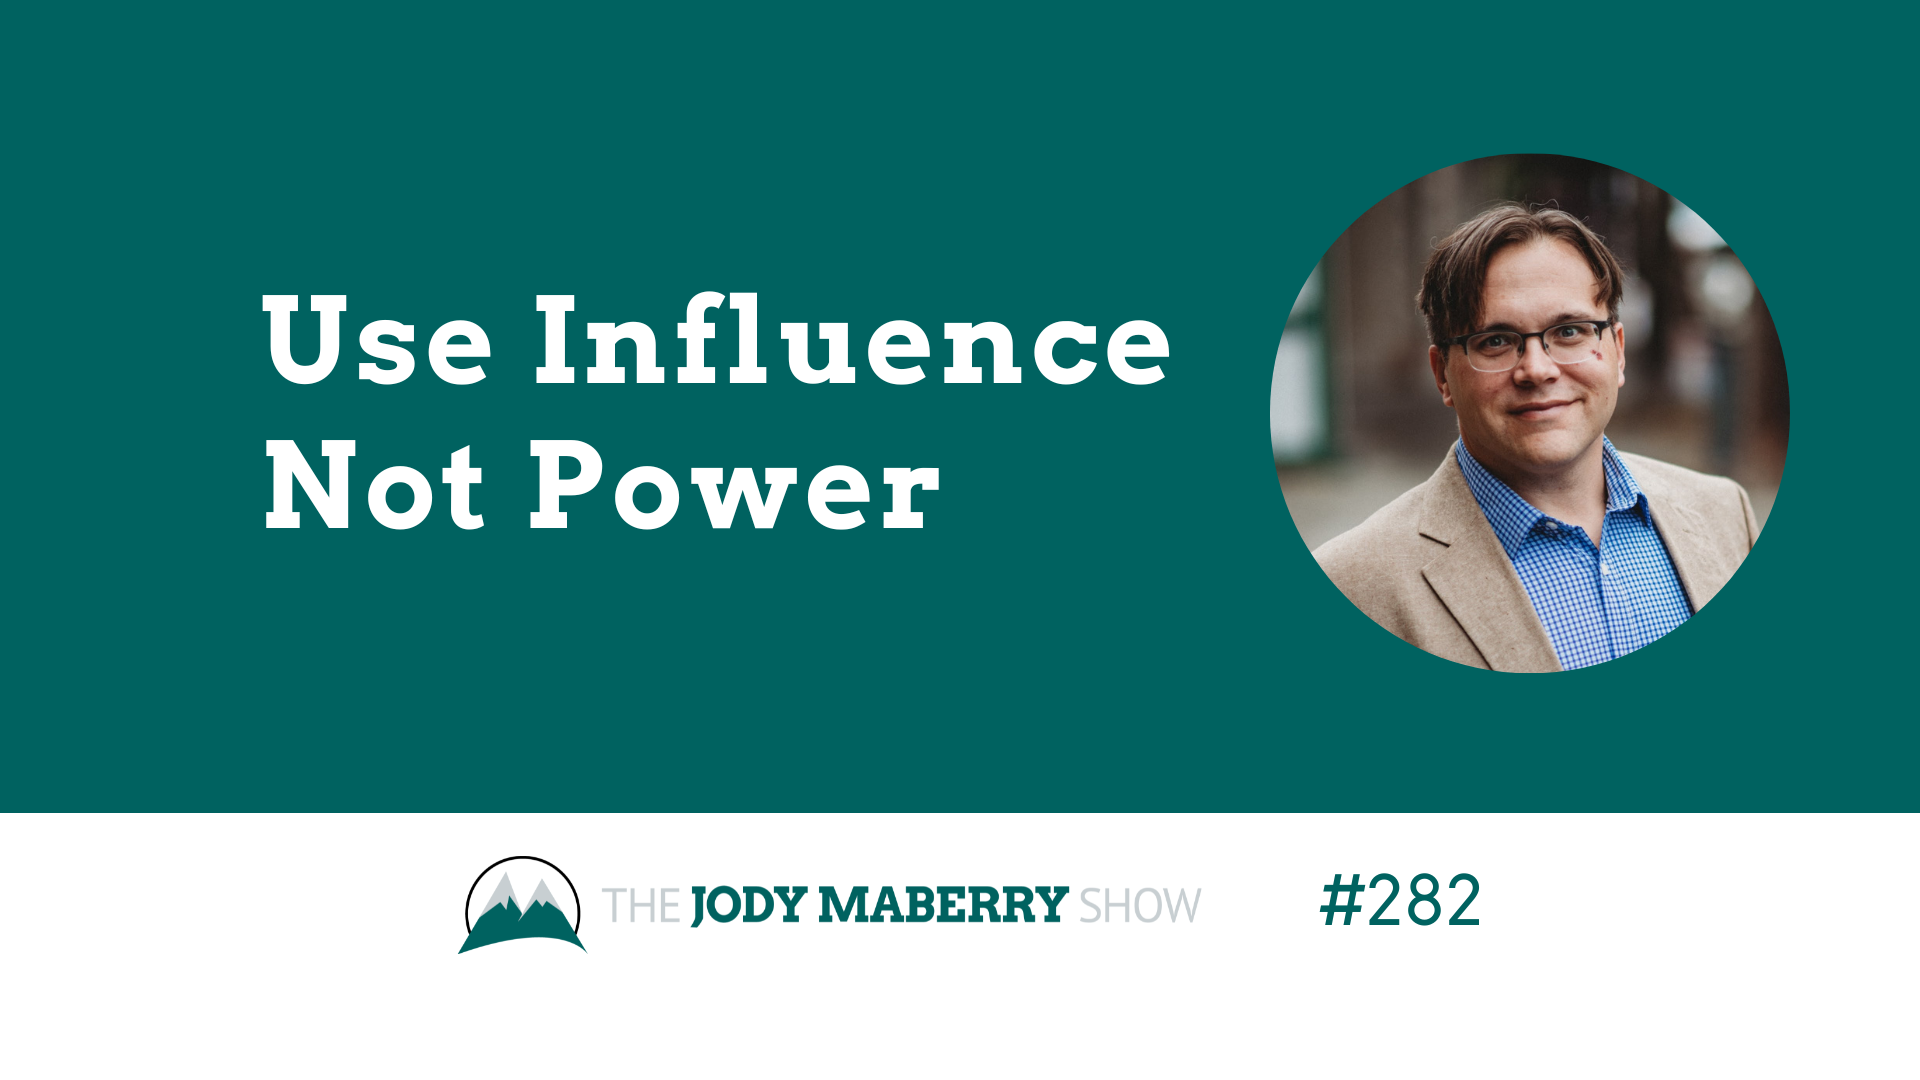 Jody Maberry Show Episode 282 Use Influence Not Power